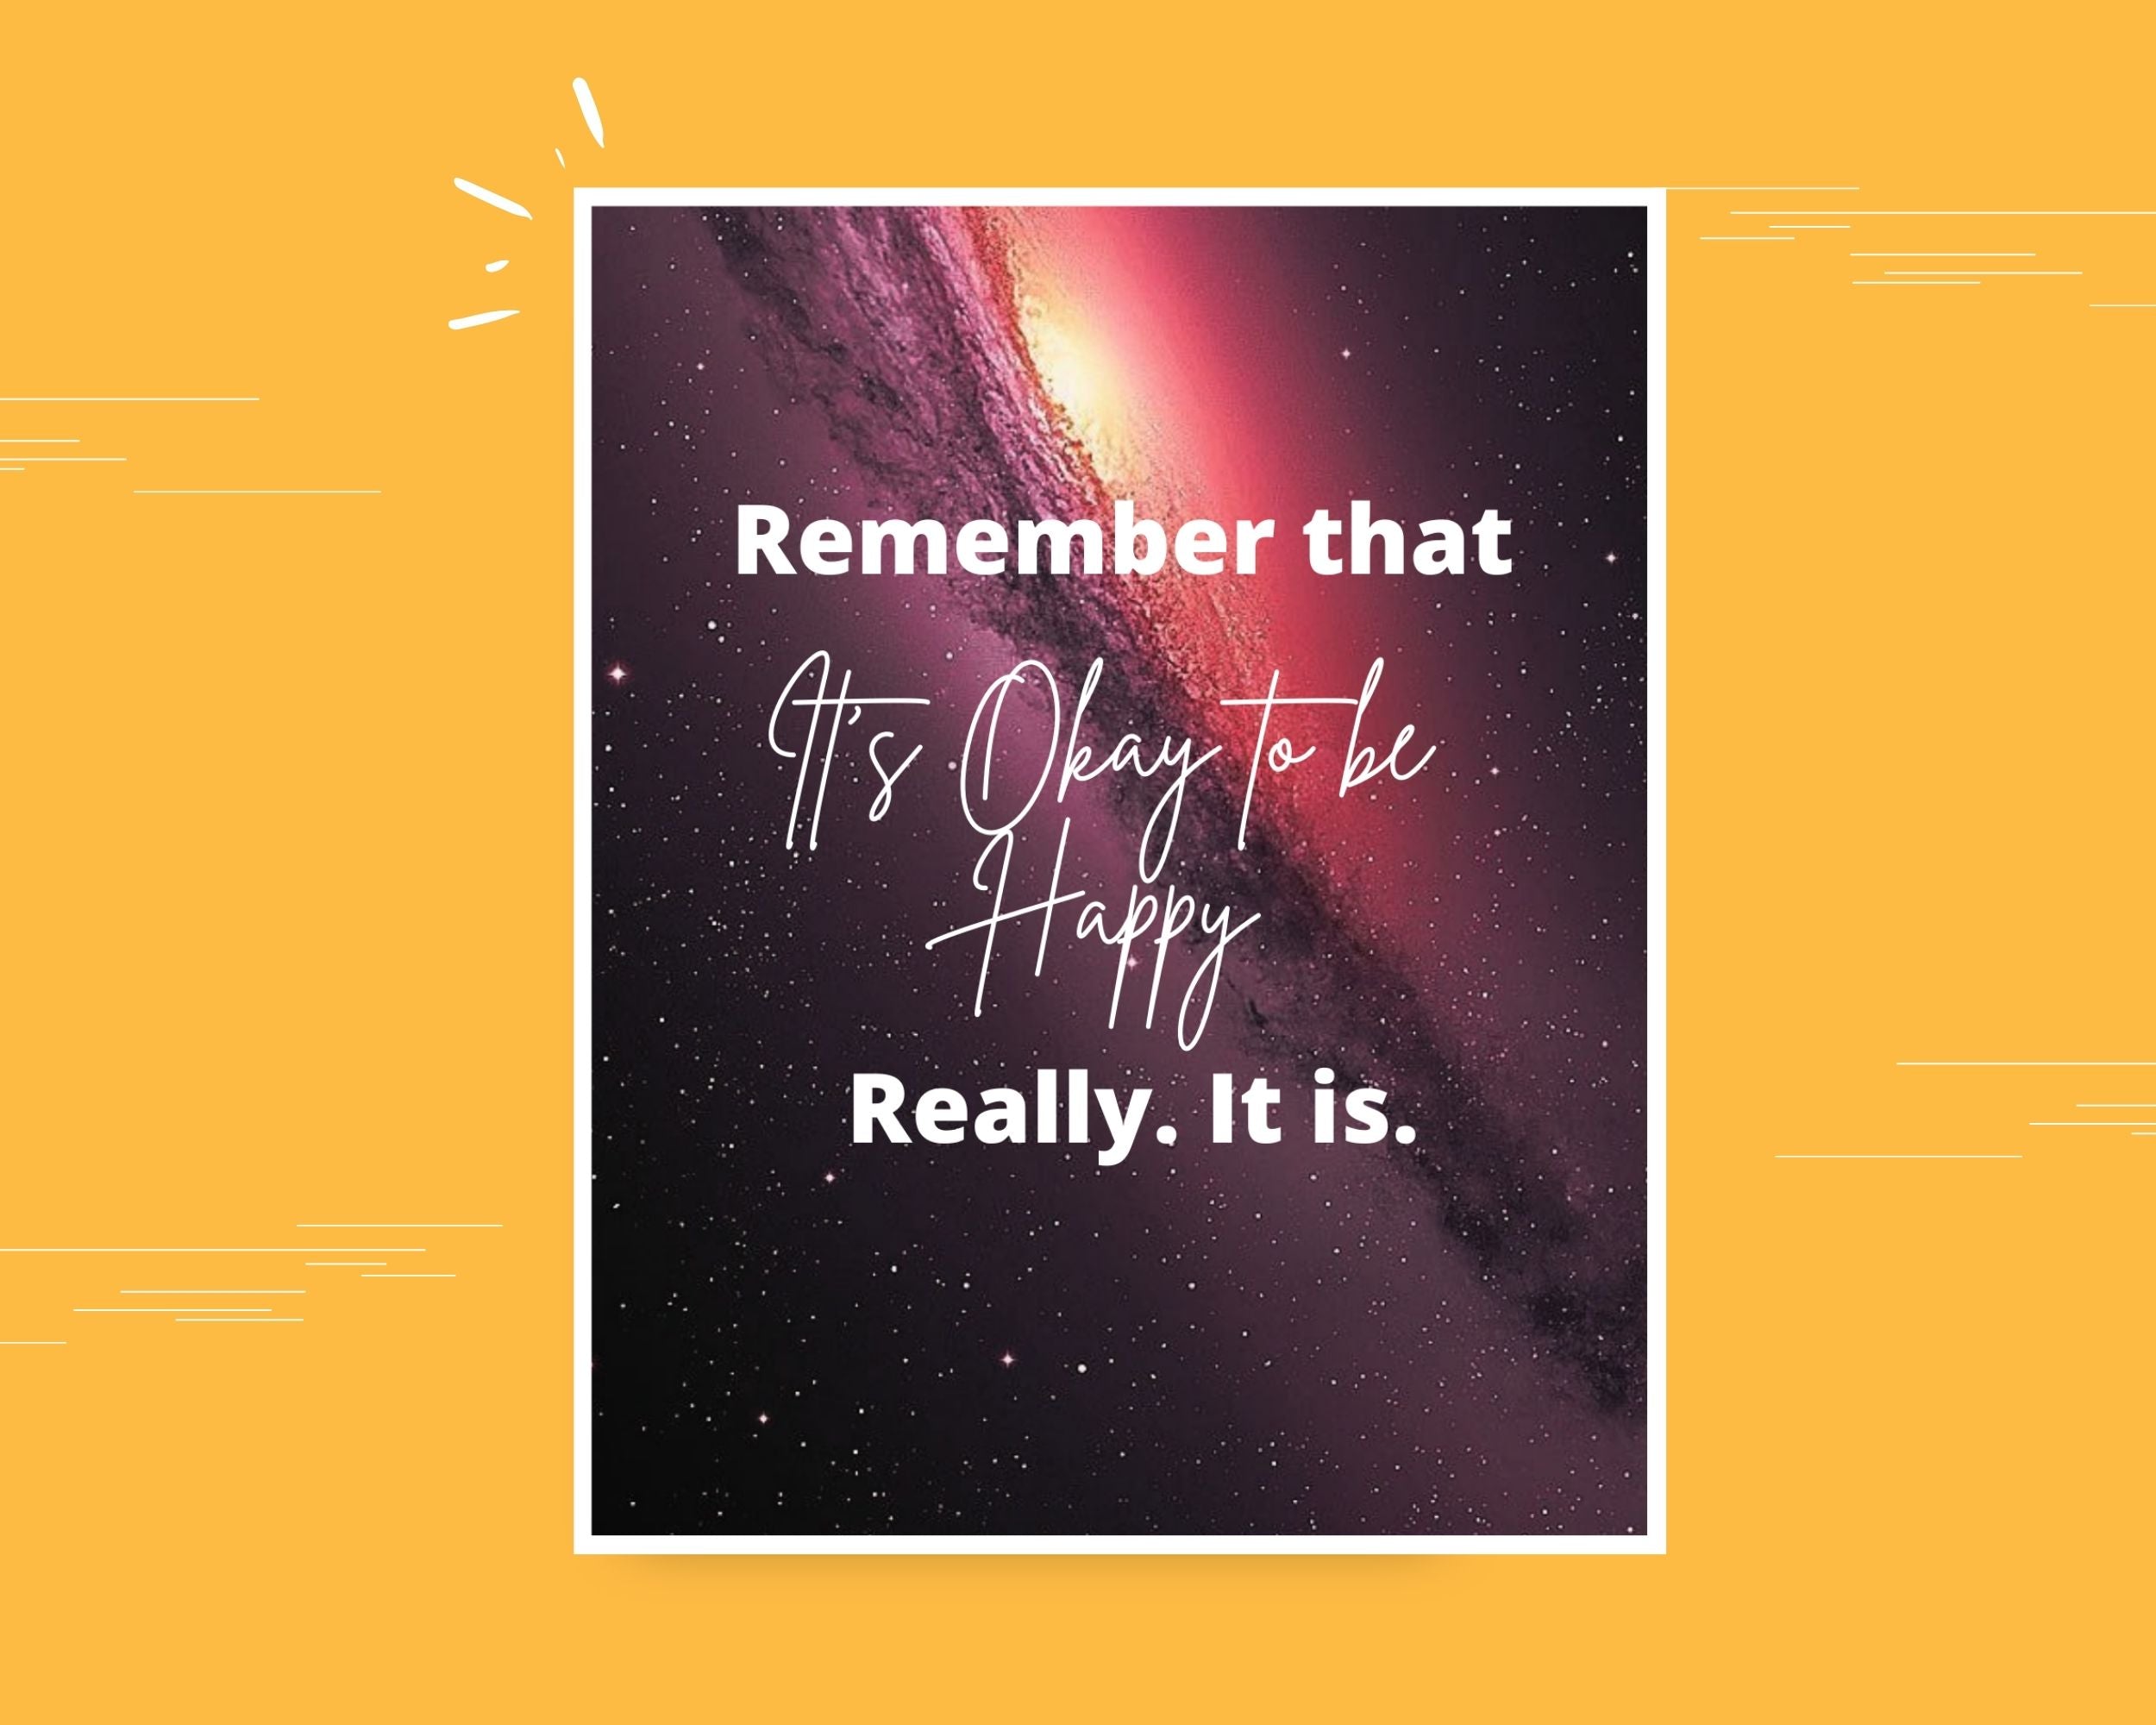 Inspirational Cosmic Messages Card Deck | Editable 42 Card Deck in Canva | Size 4"x 5" | Commercial Use